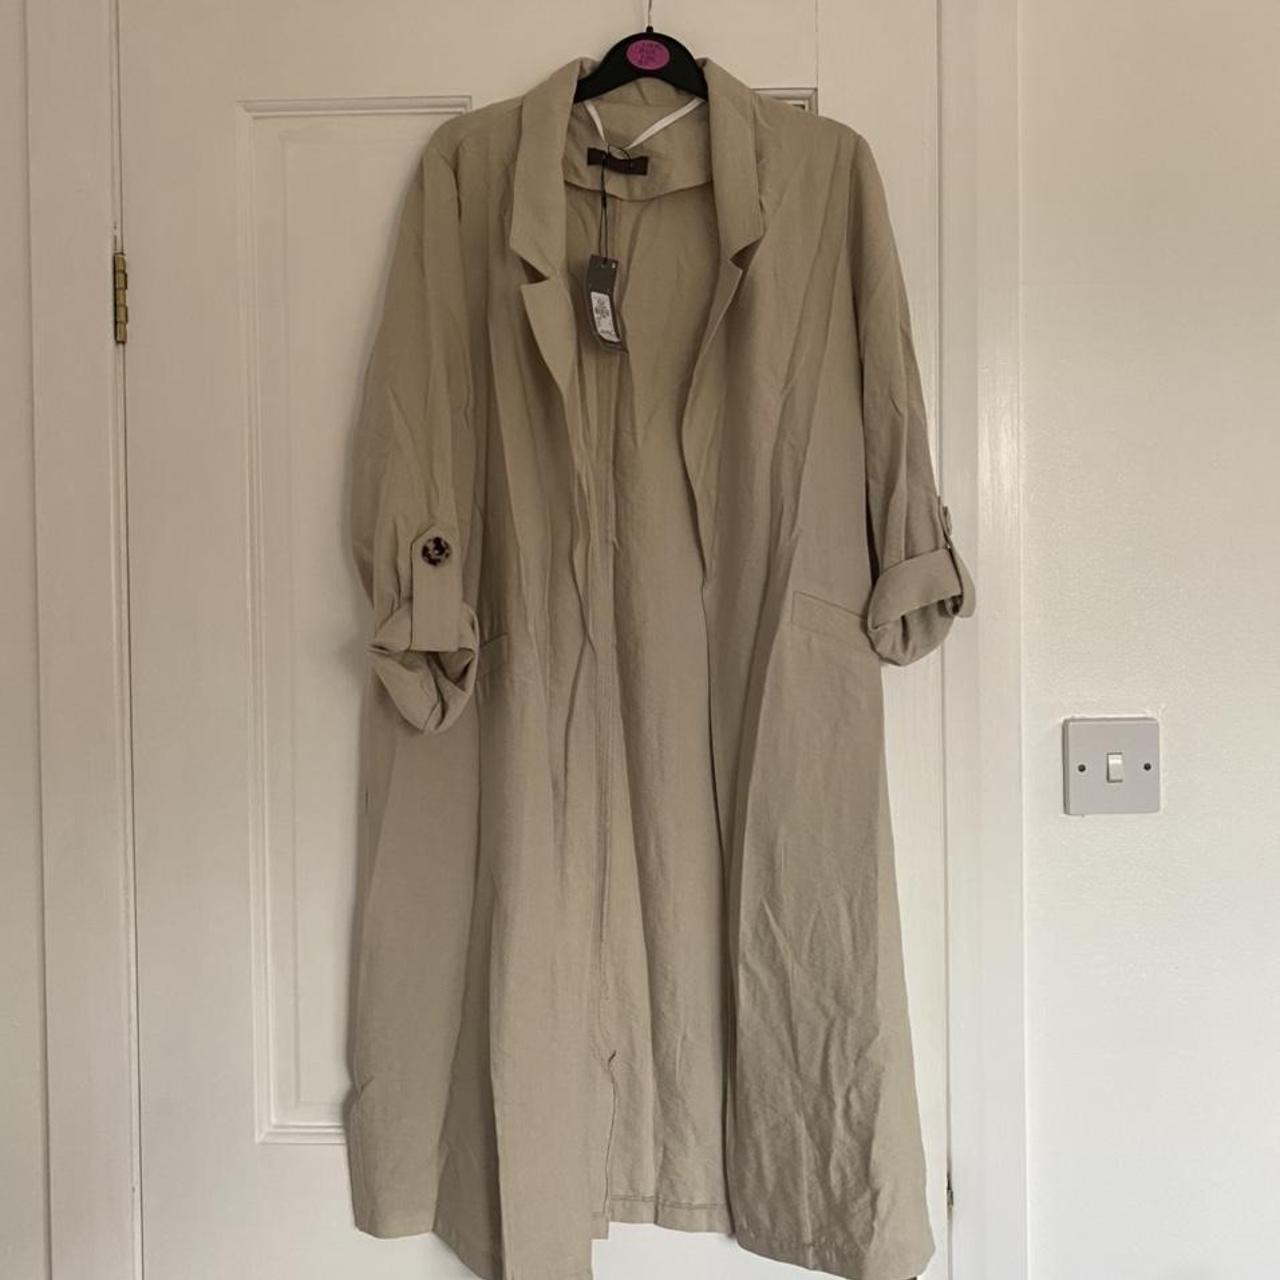 Primark trench coat. Size 6 and brand new with tags.... - Depop